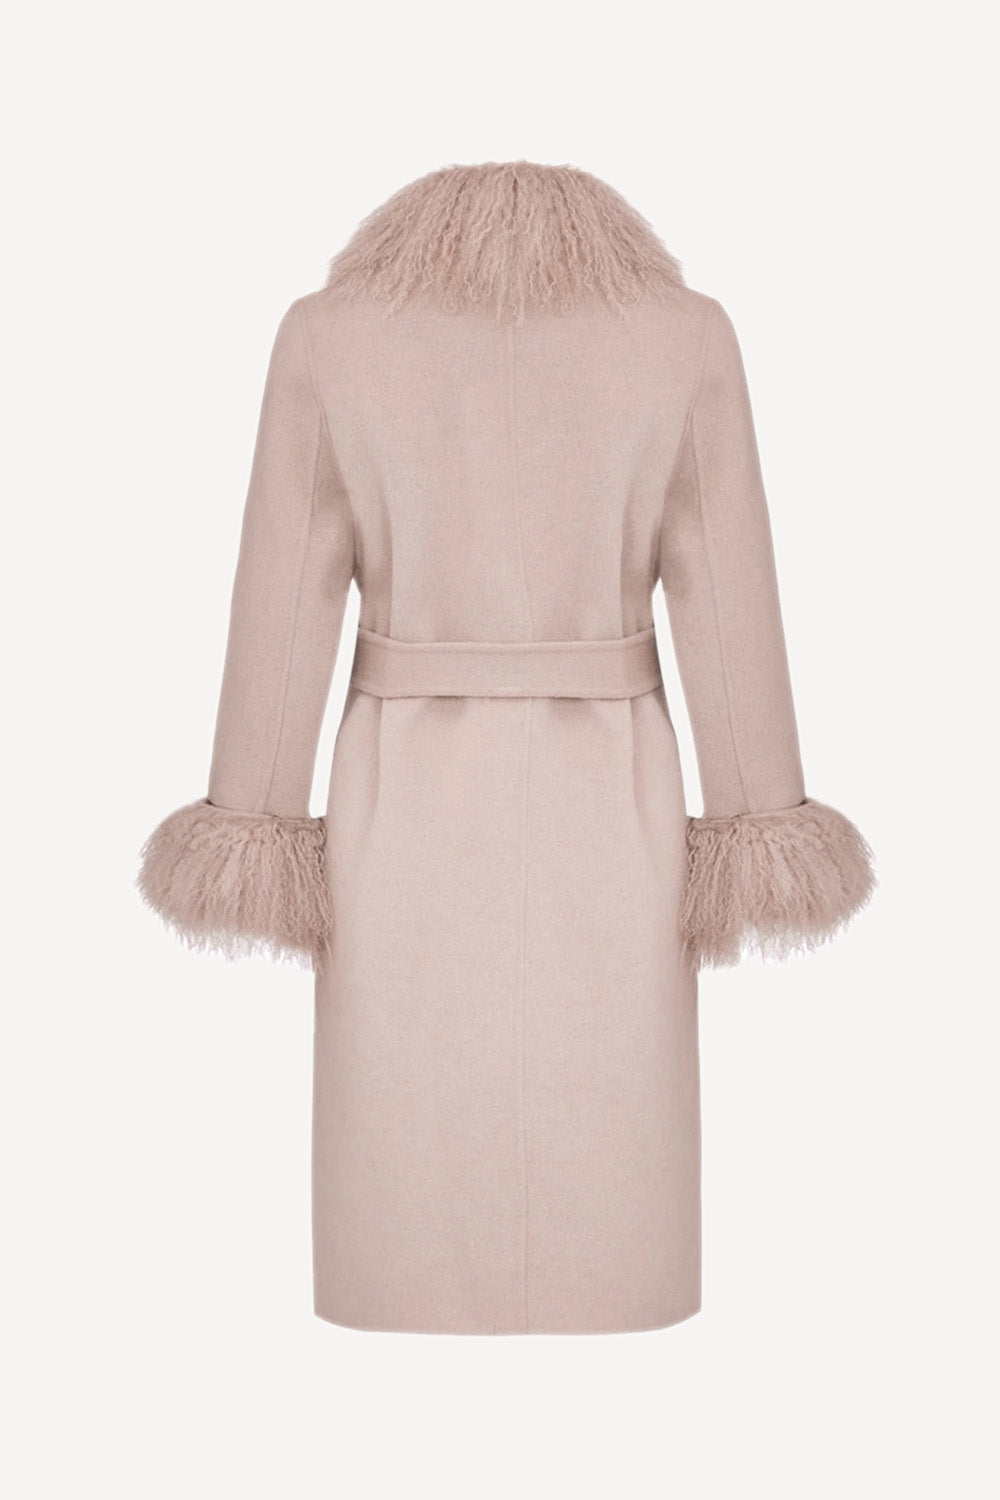 Cashmere & shearling coat in soft pink